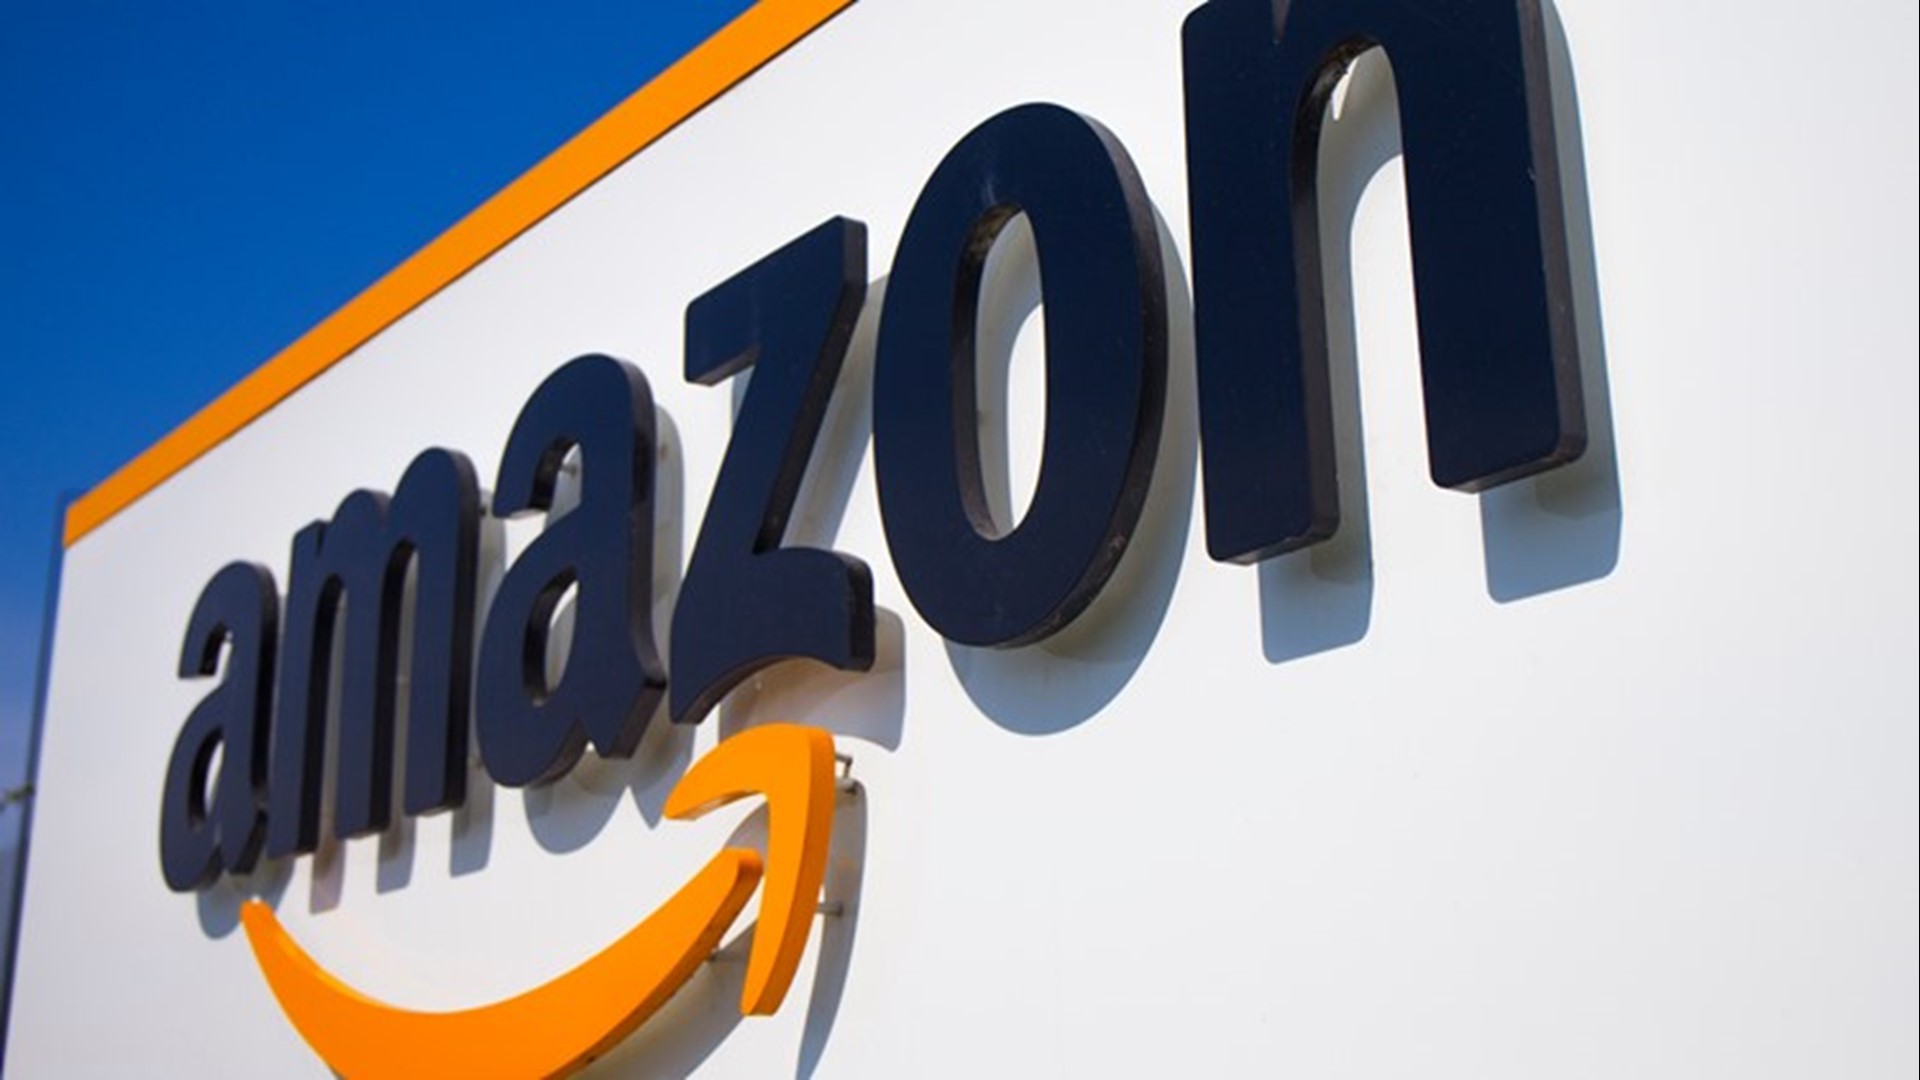 Amazon, Twitter, Paypal and the U.K. government's home page are down amid an internet outage.